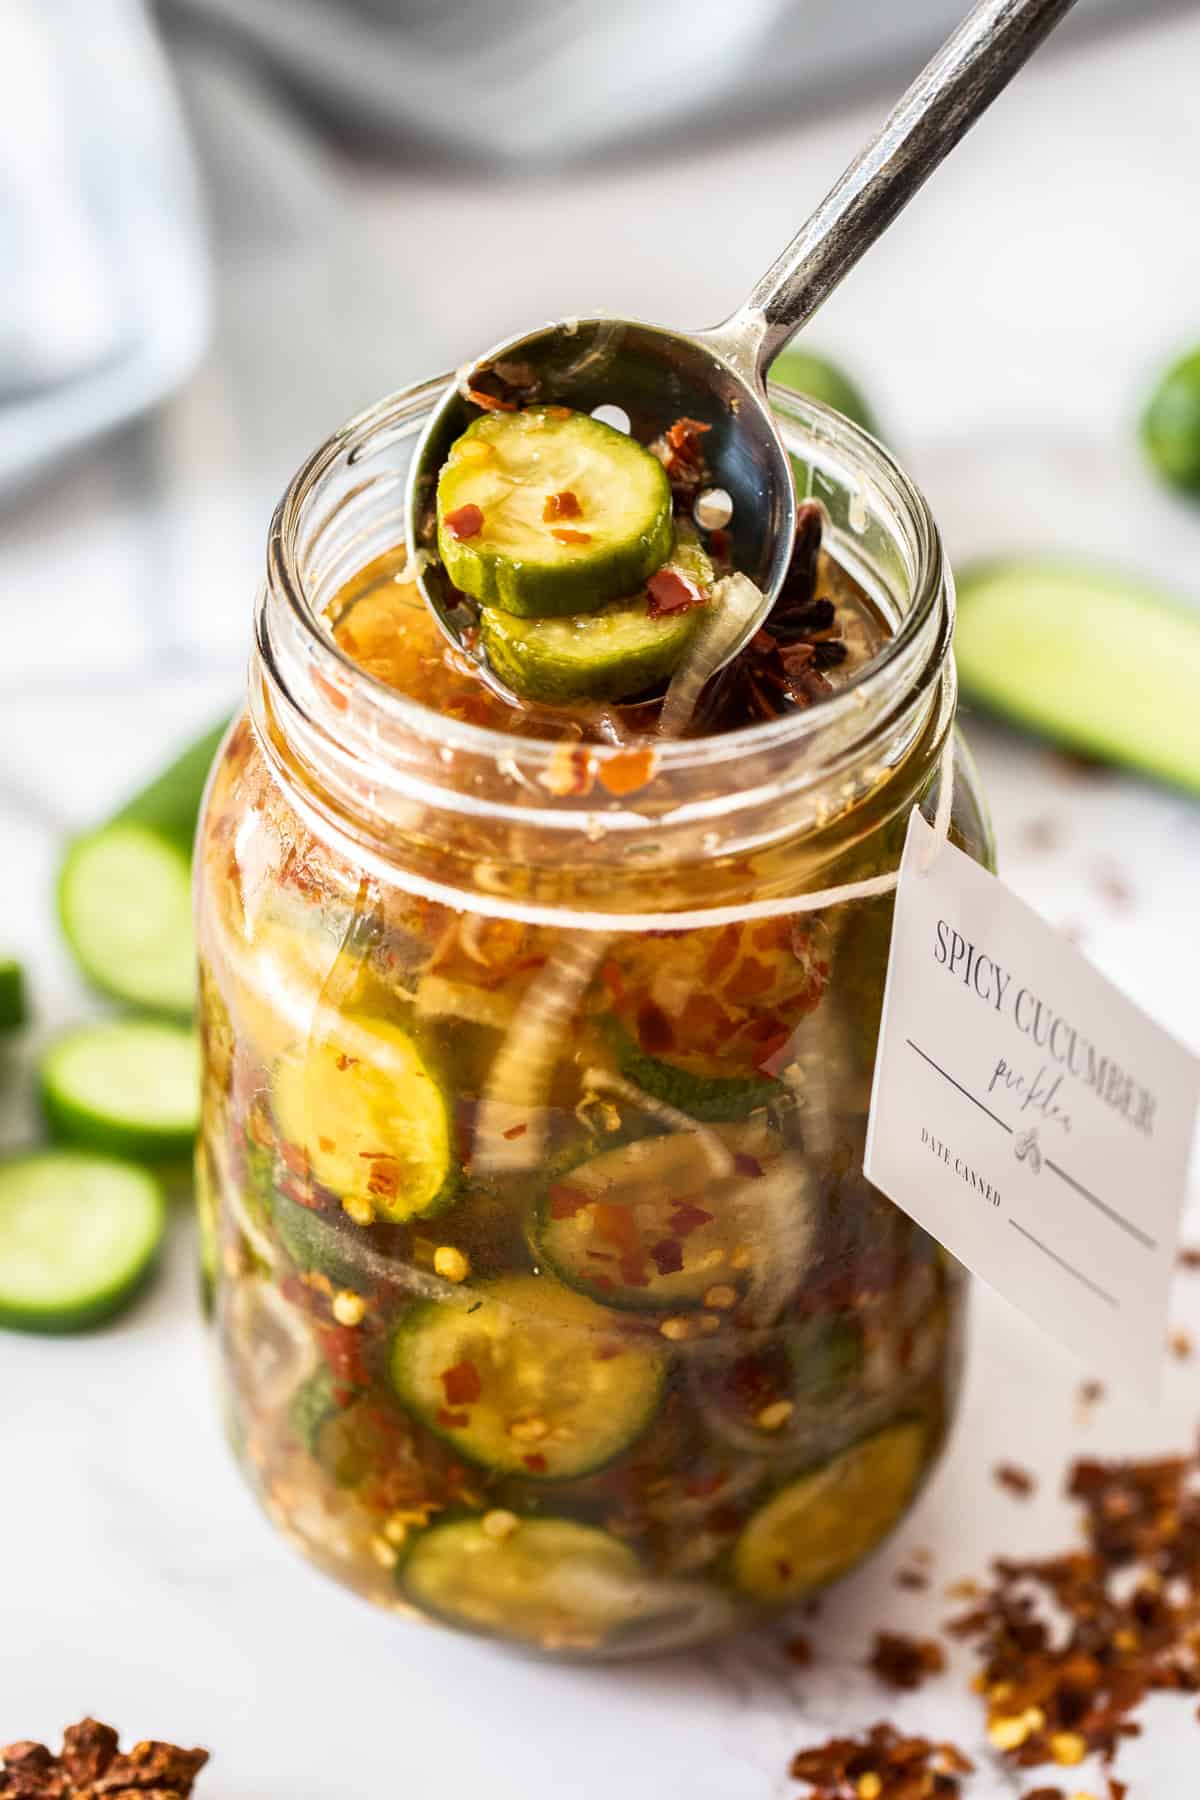 Jar of Spicy Cucumber Pickles, with a spoon reaching in to lift some pickles out of the jar.